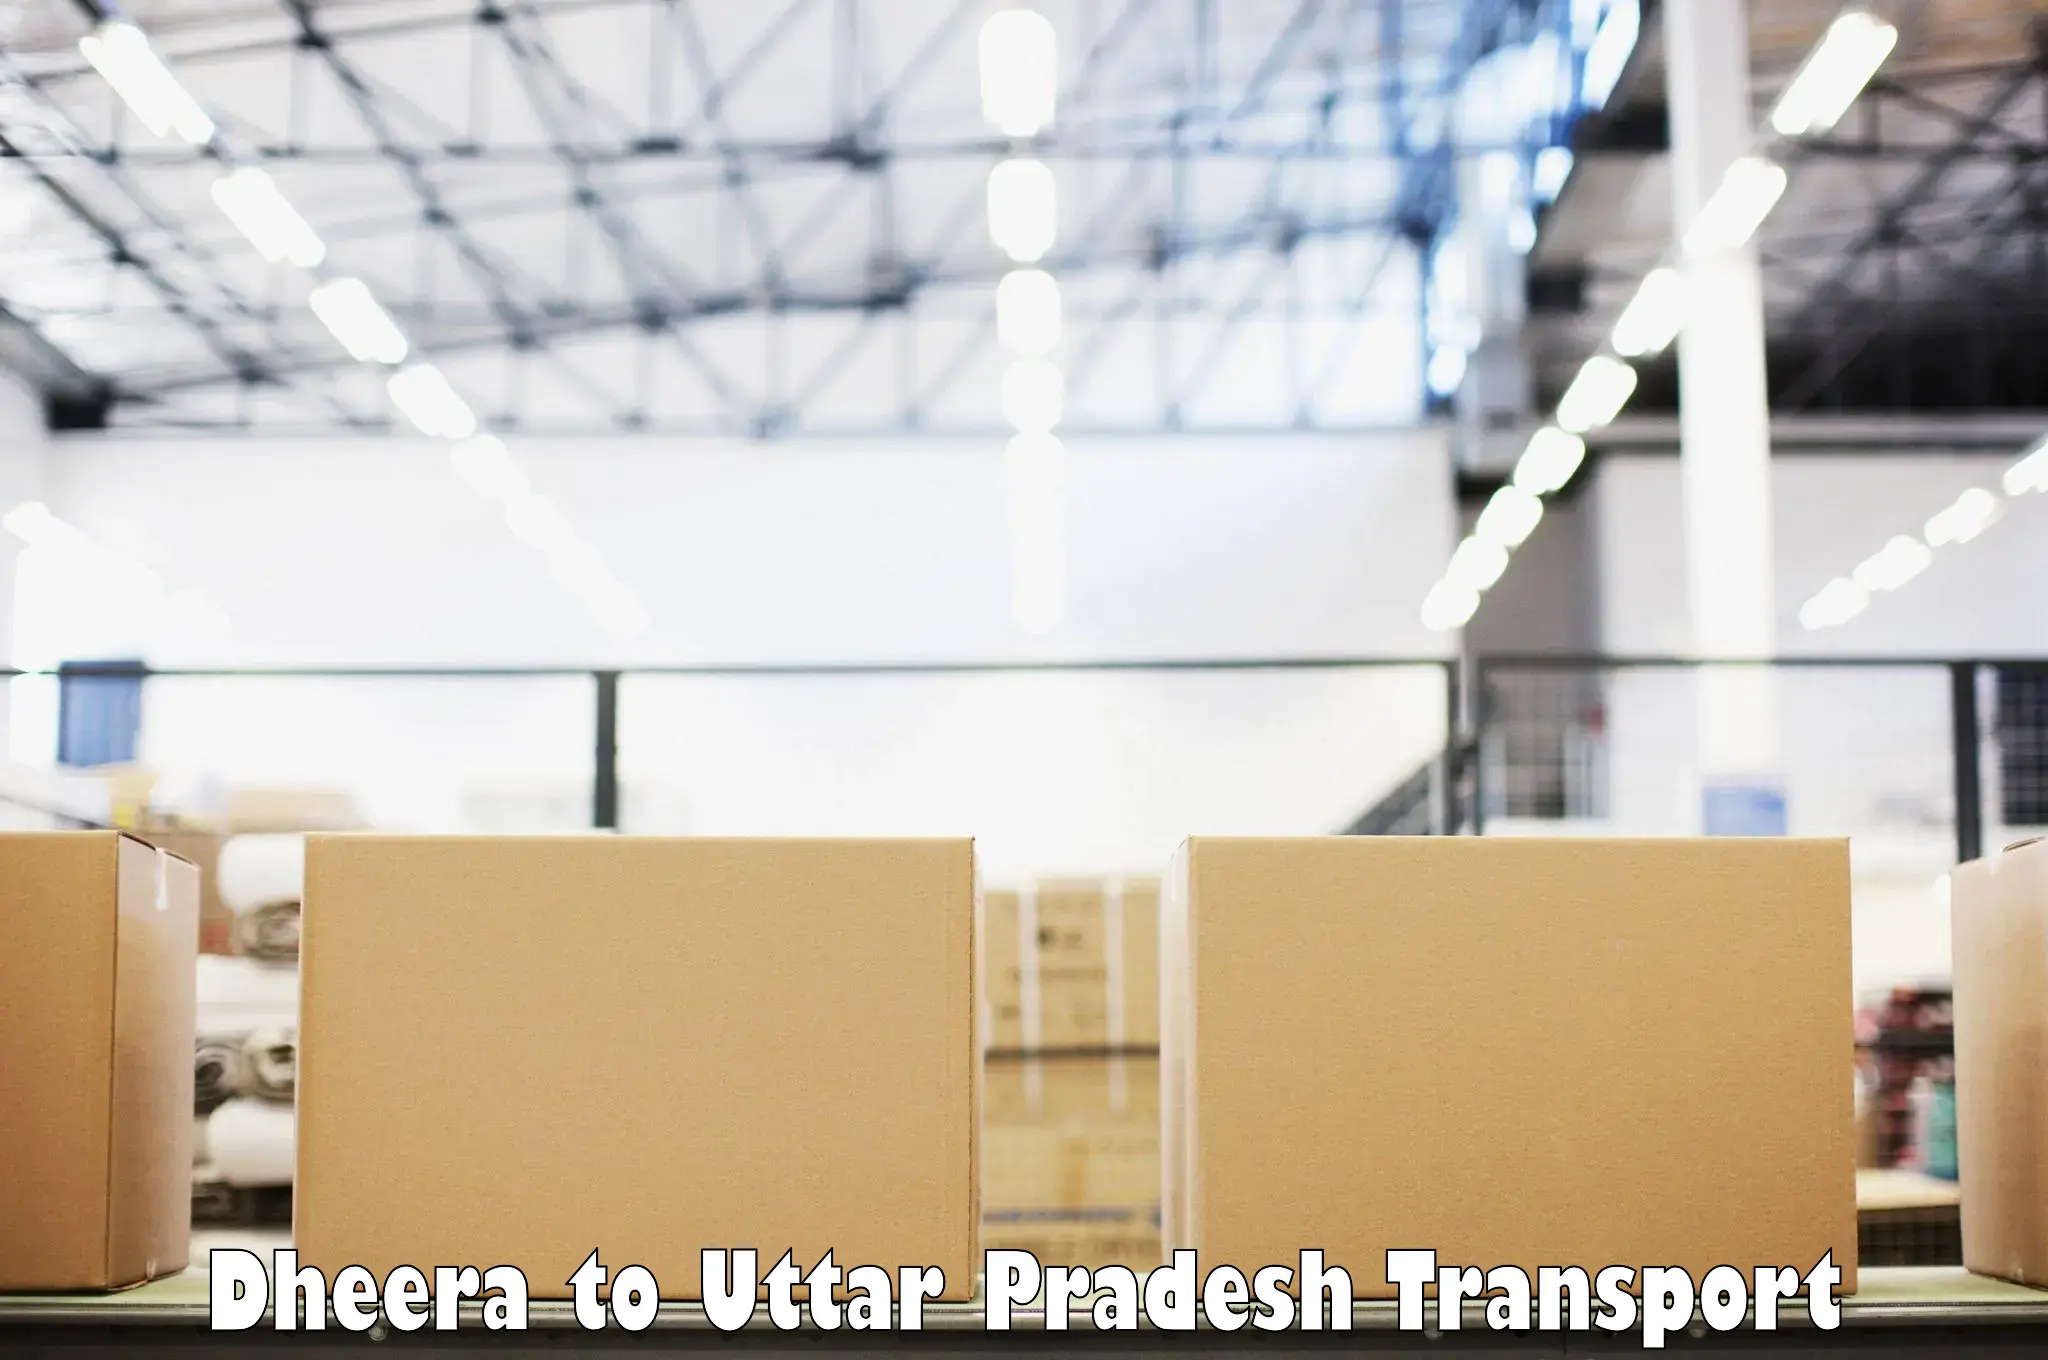 Truck transport companies in India Dheera to Hathras